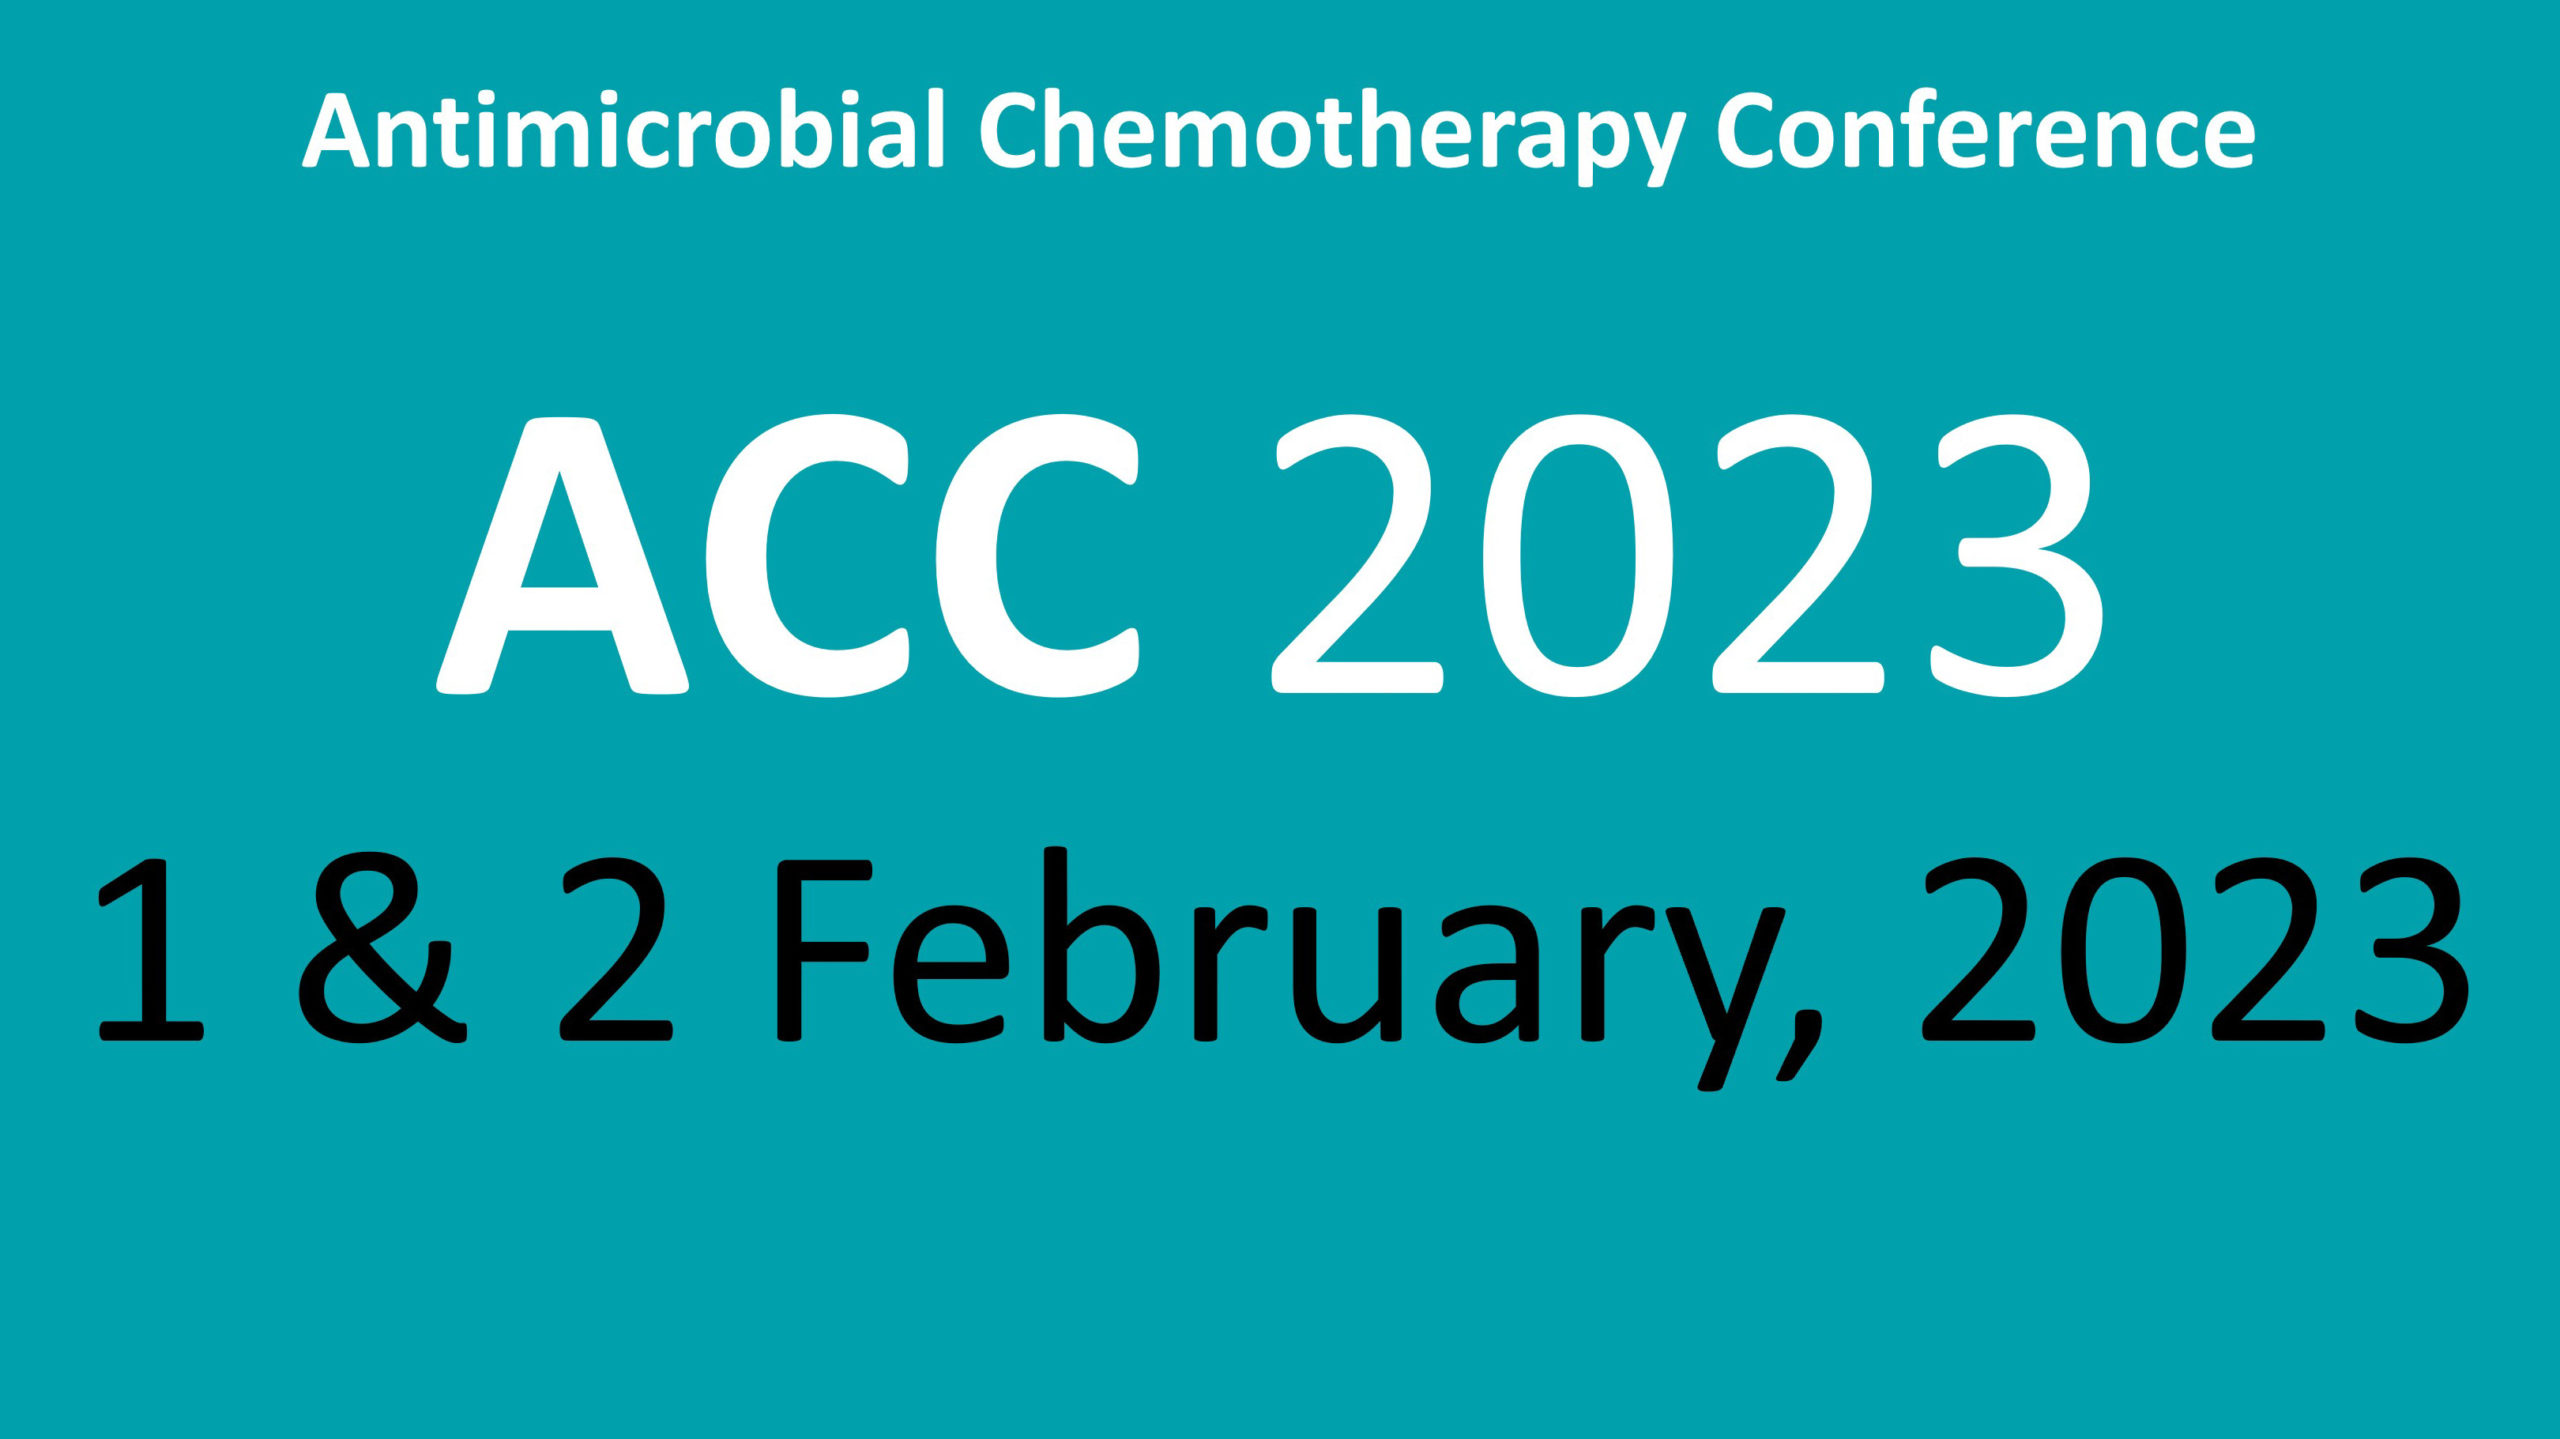 Antimicrobial Chemotherapy Conference 2023